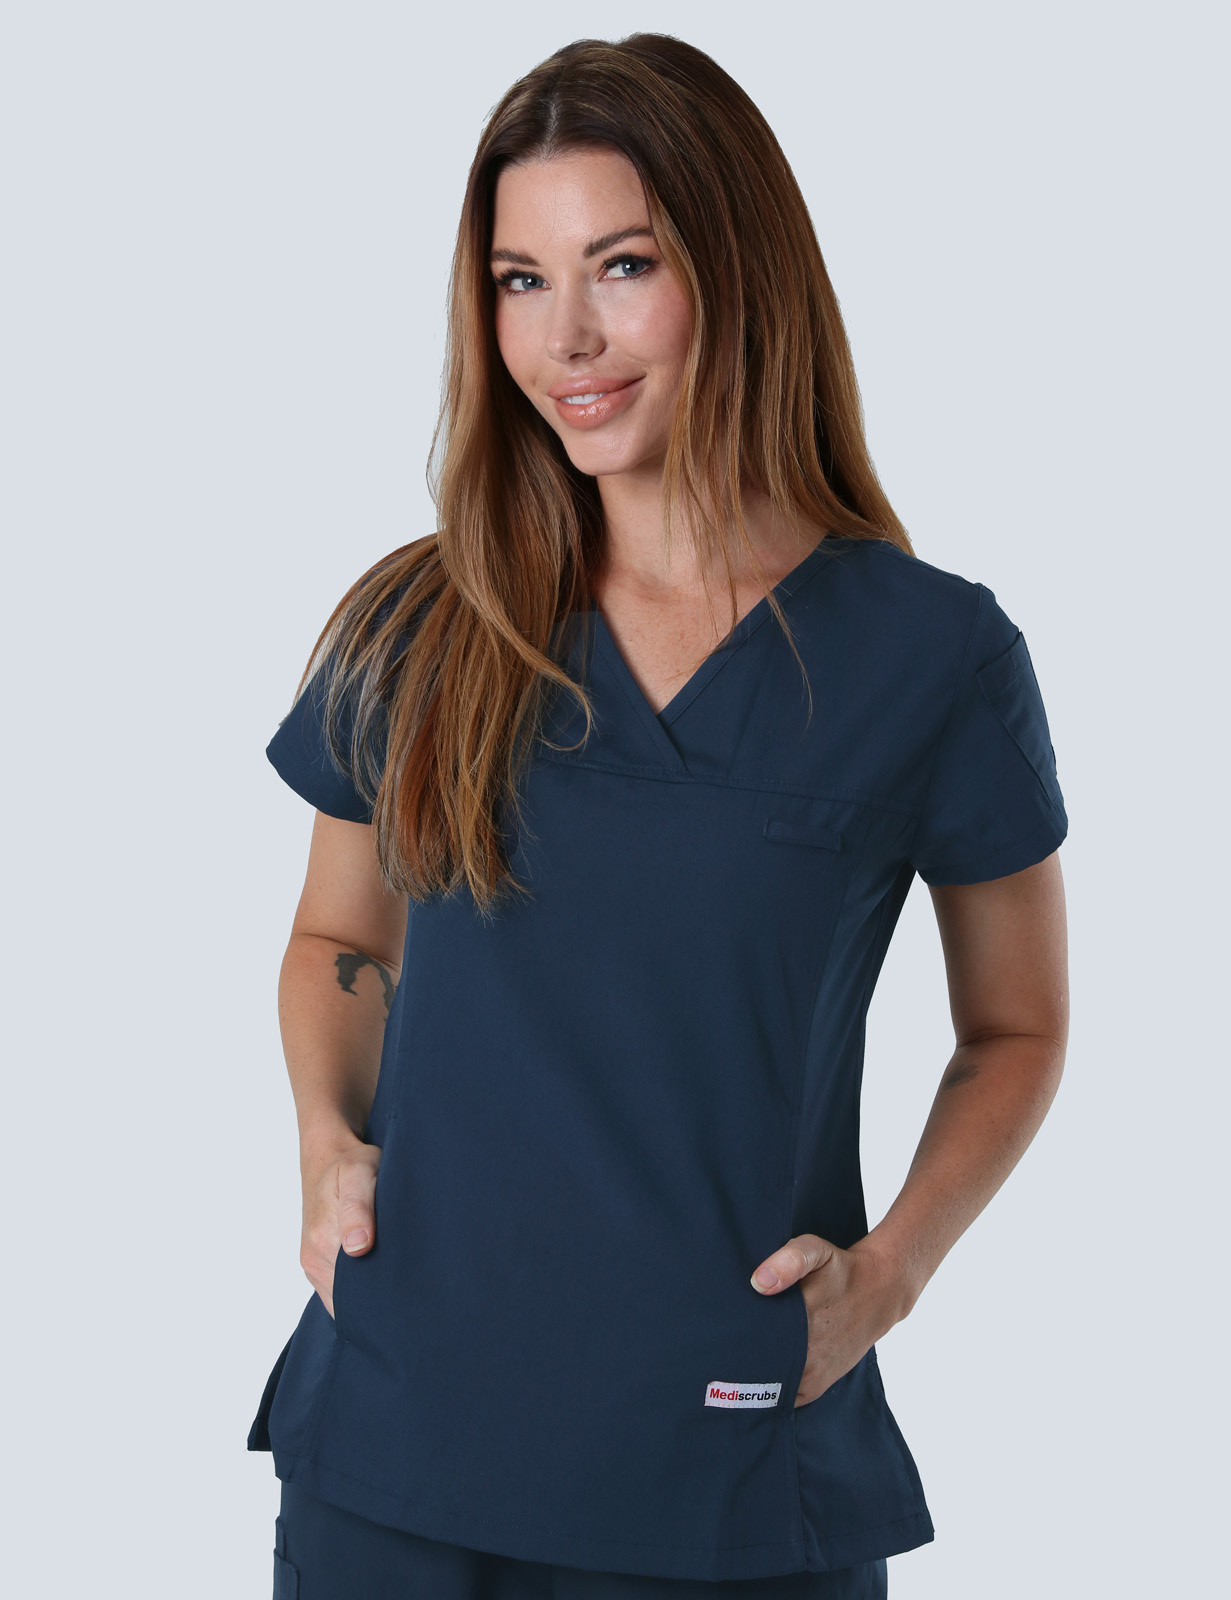 Gatton Health (Women's Fit Solid Top and Cargo Pants in Navy incl Logos)